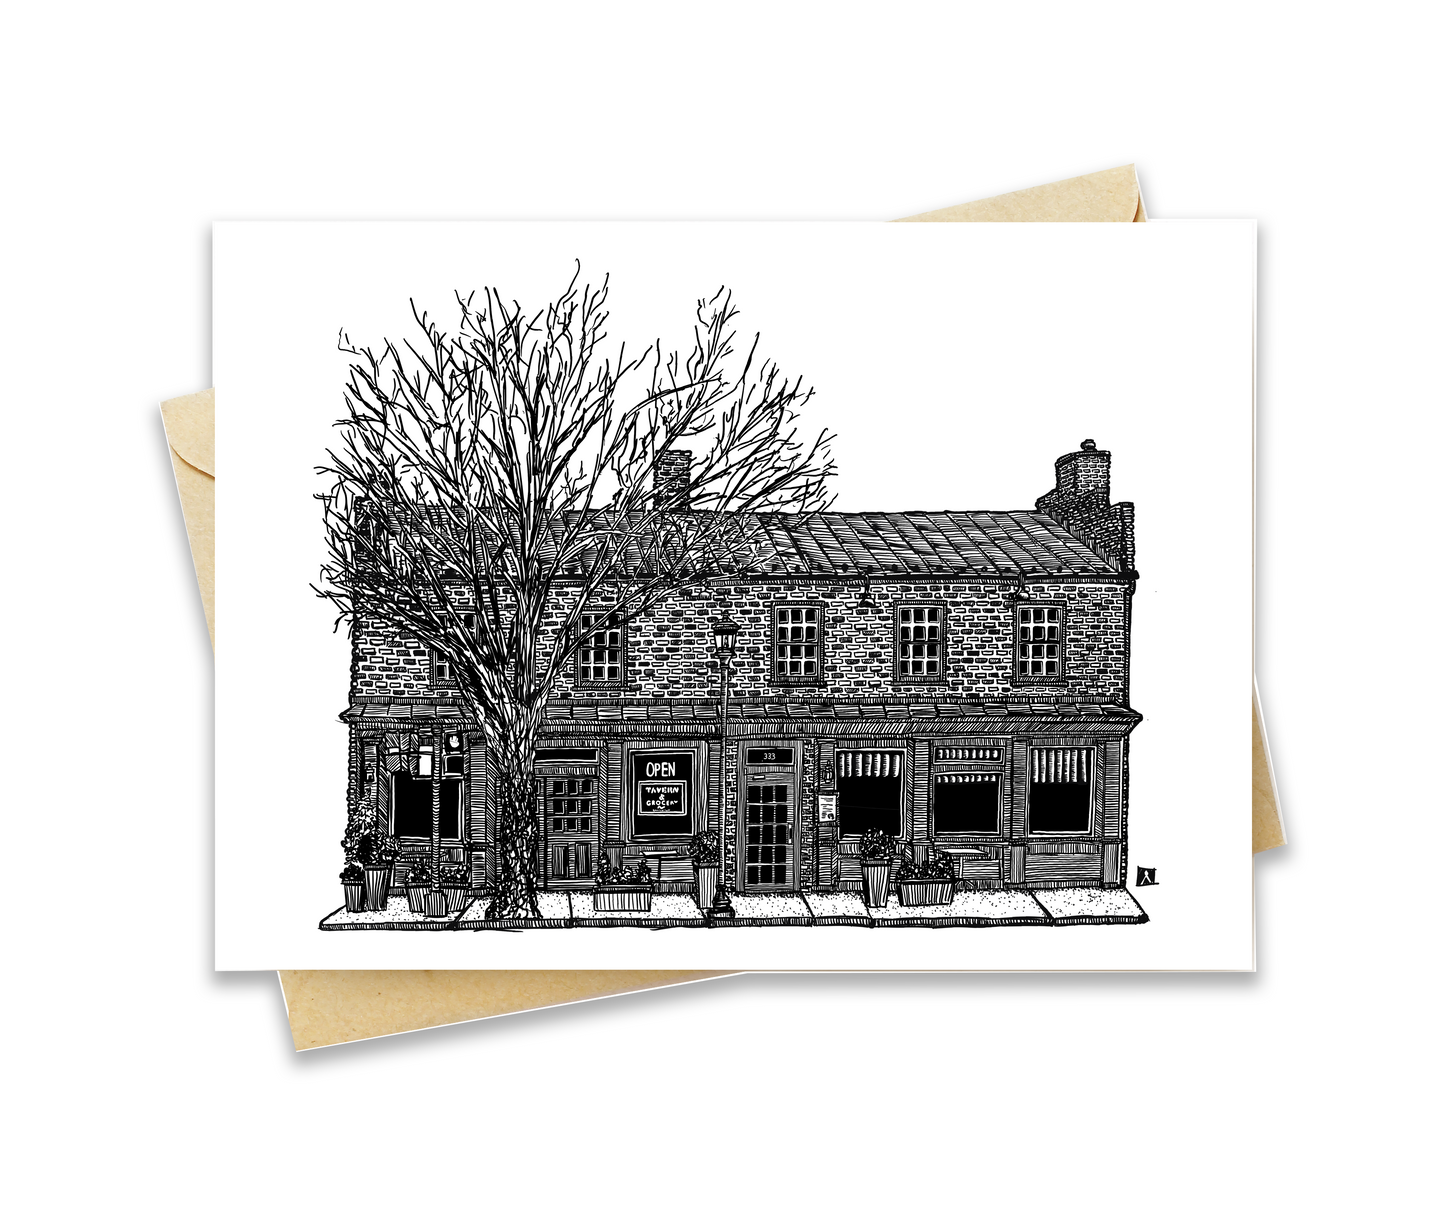 BellavanceInk: Greeting Card of the Charlottesville Area Bar/Restaurant Tavern And Grocery